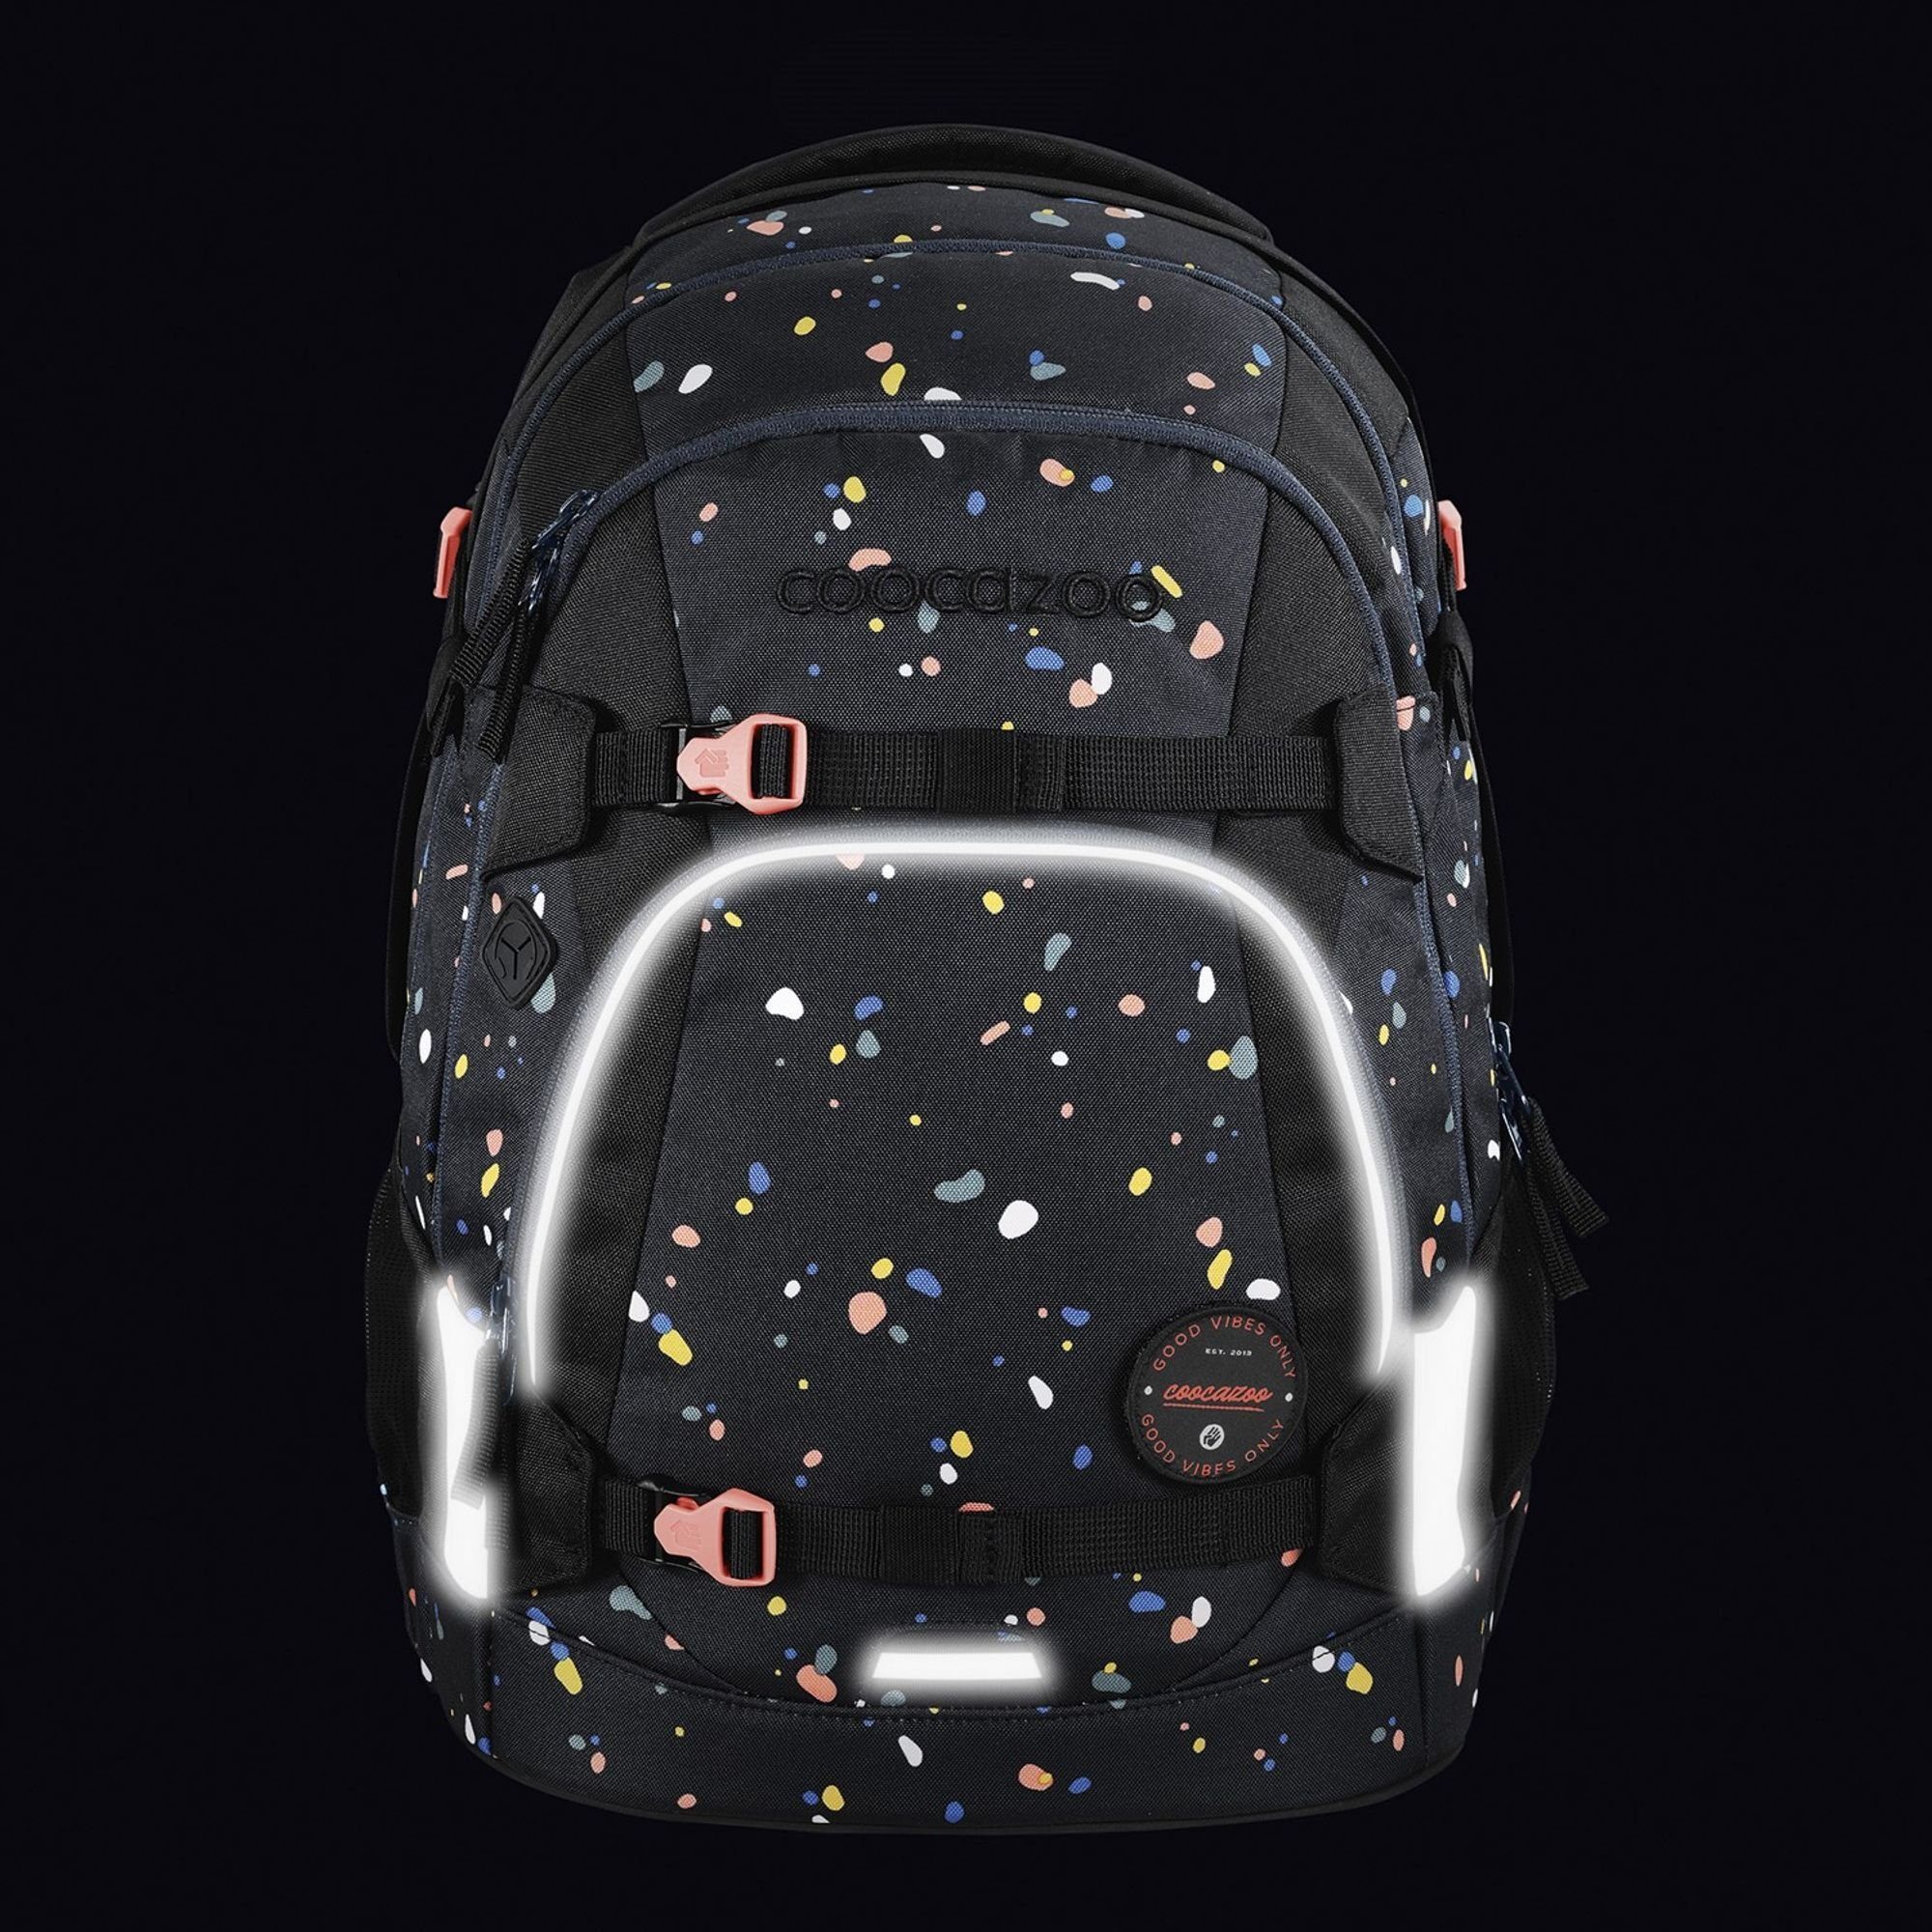 sprinkled coocazoo Schulrucksack Mate, candy Polyester